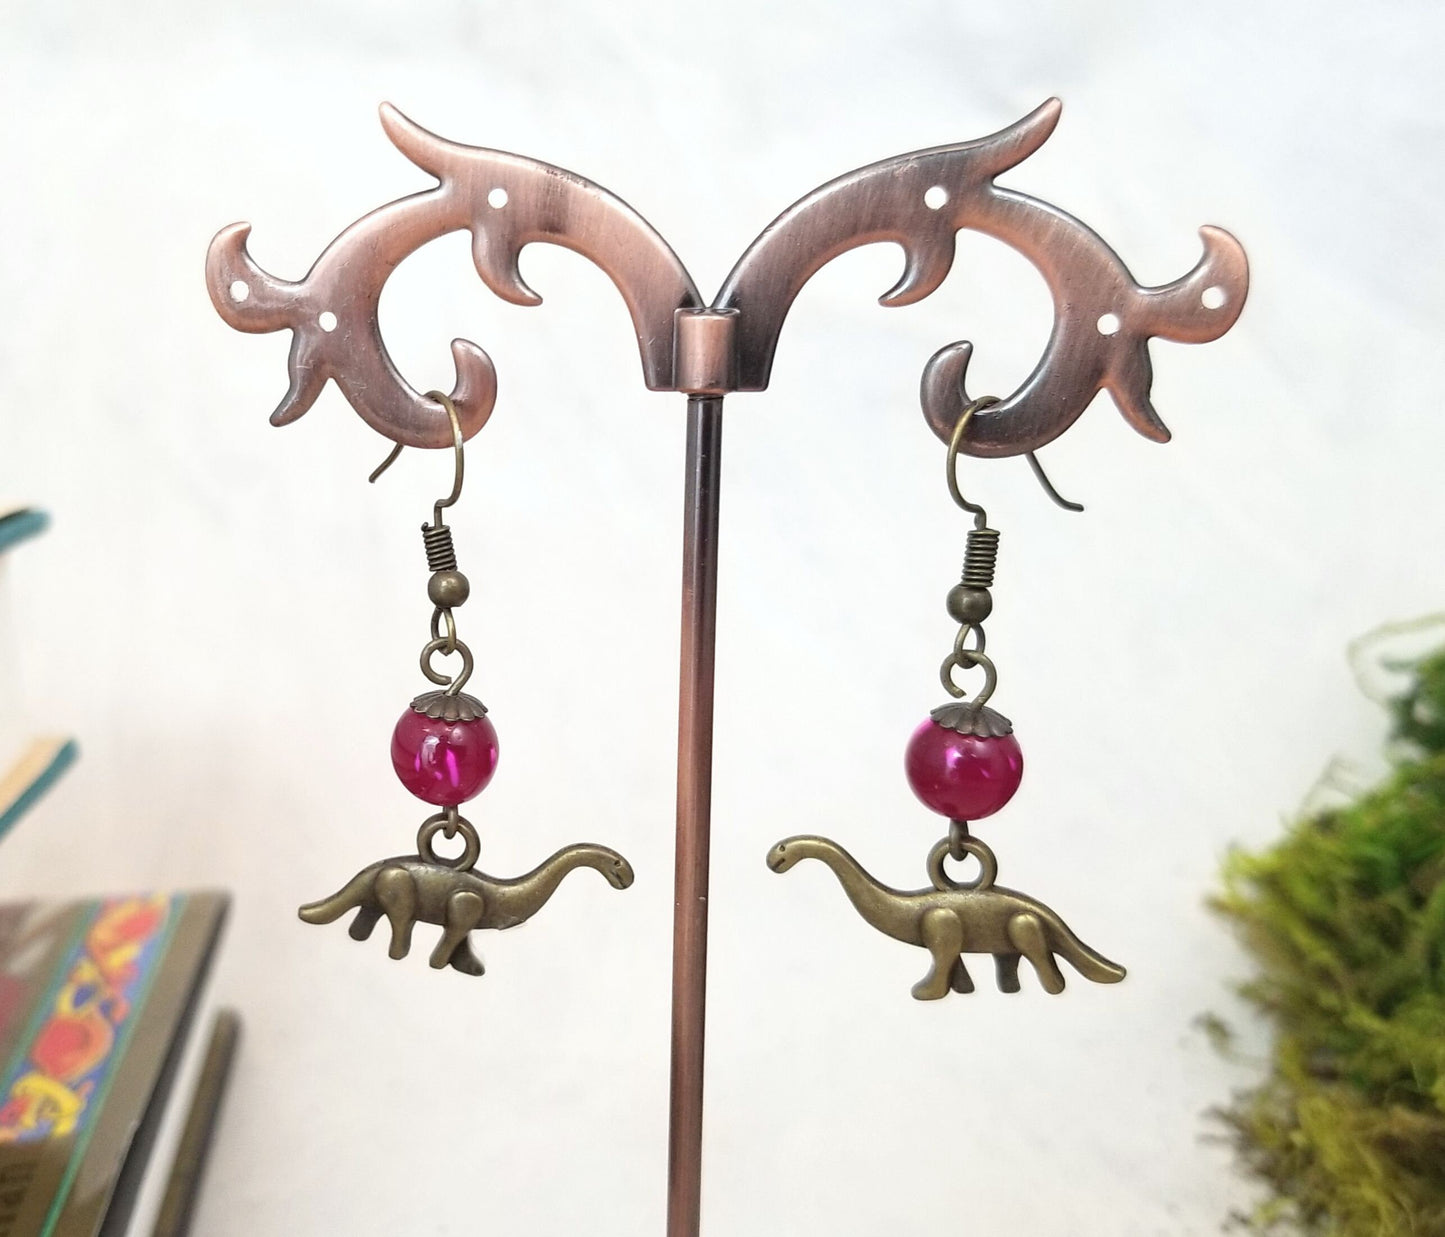 Earrings with Brontosaurus Dinosaur Charms, Steampunk, Wedding, Bridesmaid, Art Nouveau, Garden, Deep Pink, Red, More Colors Available